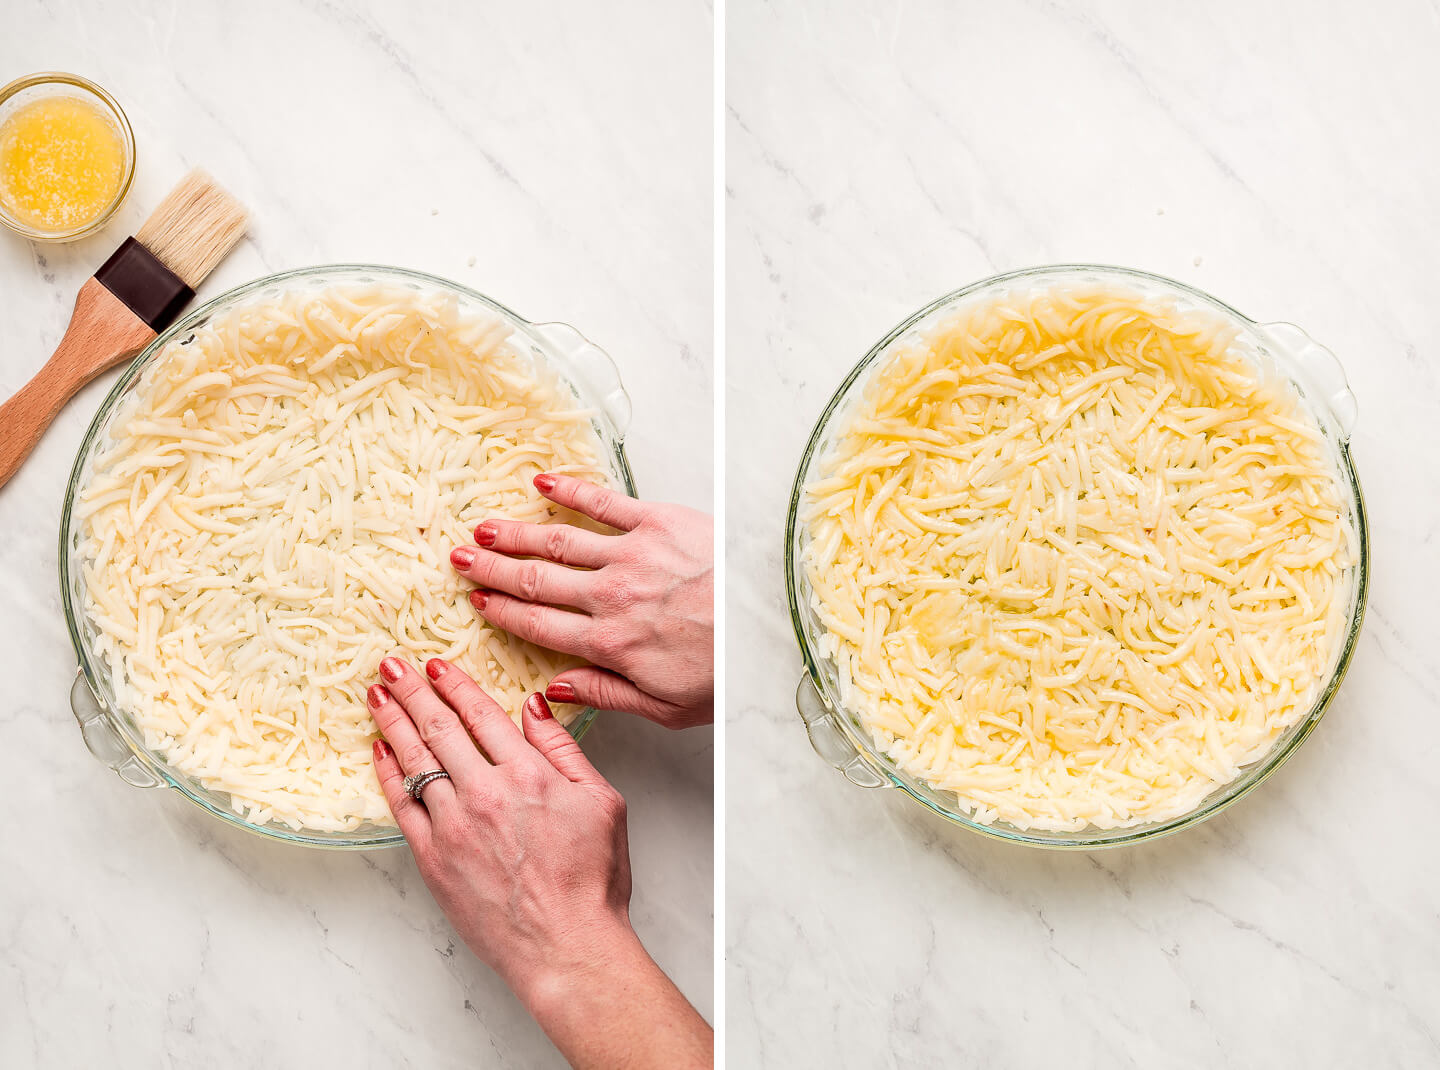 Diptych- Hands pressing hash browns into a pie plate; hash browns brushed with melted butter.